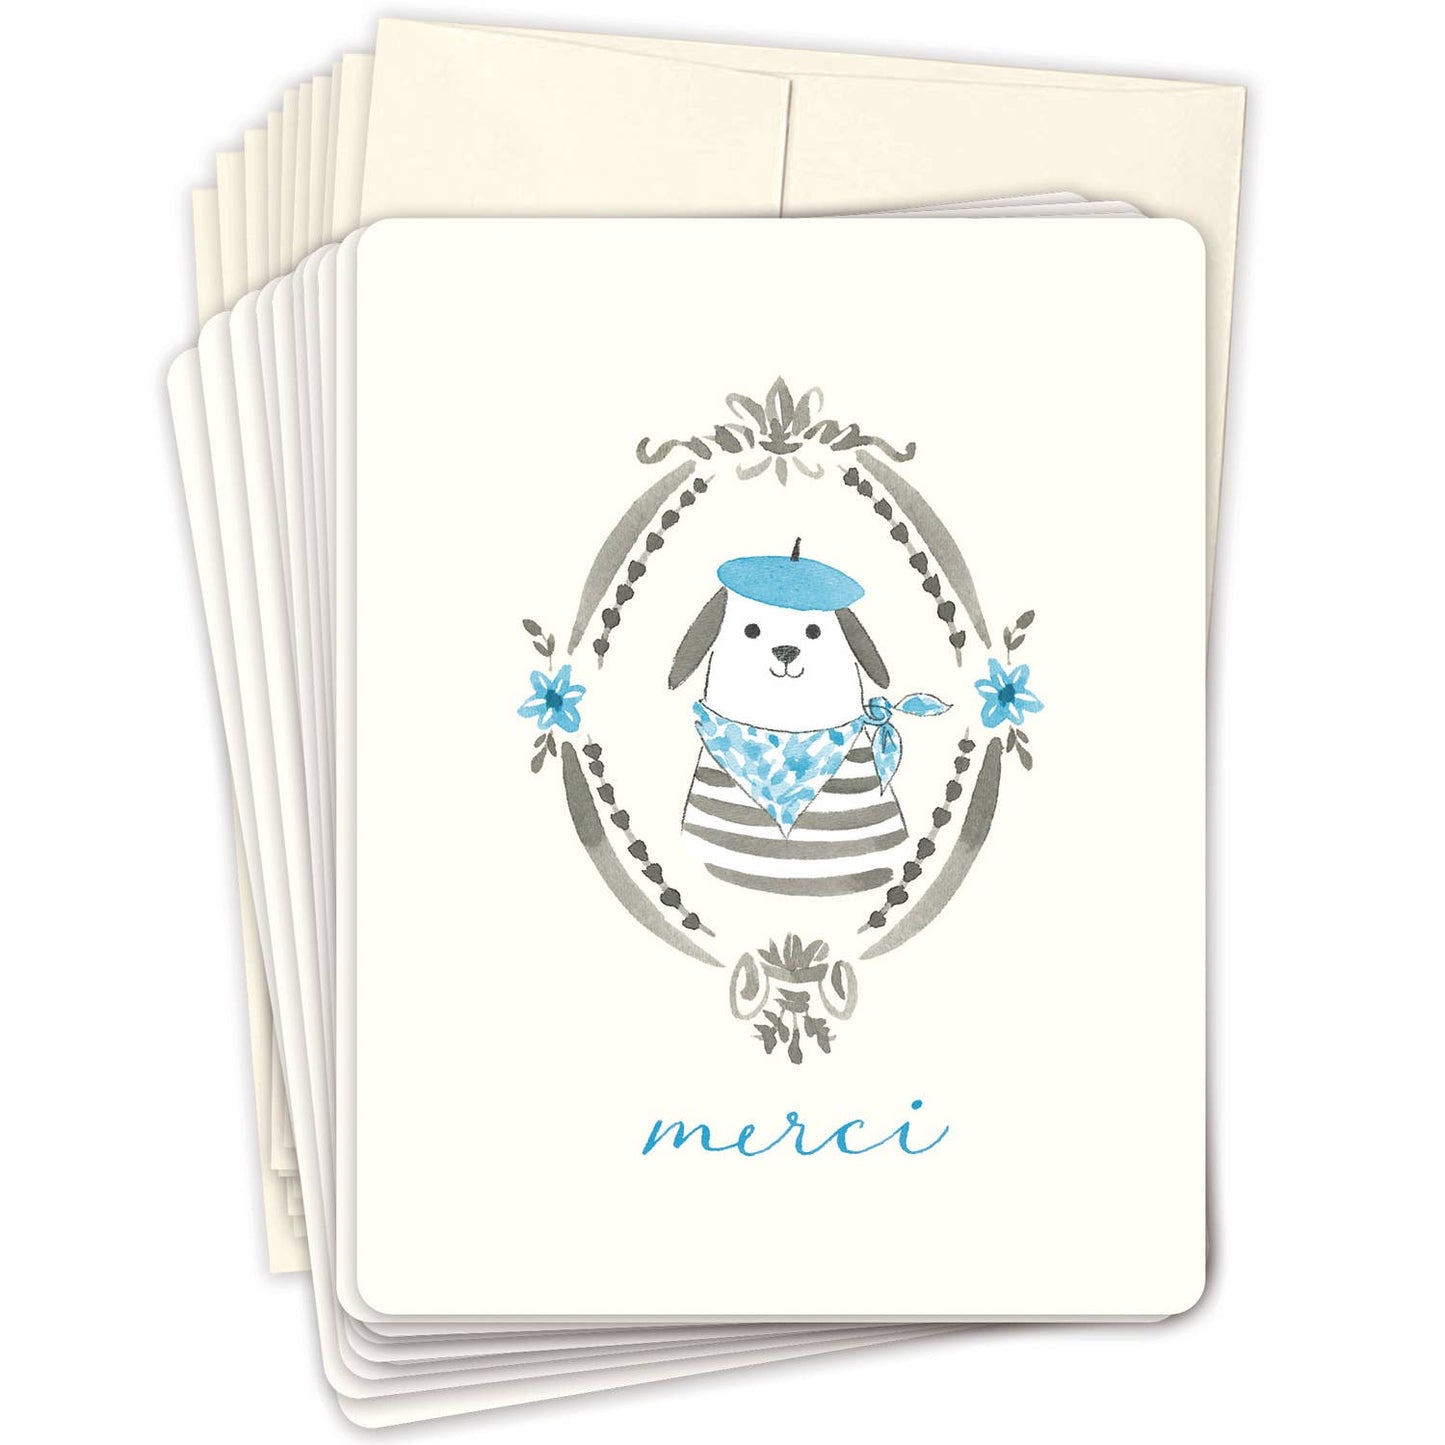 Merci Boxed Thank You Cards - Set of 10